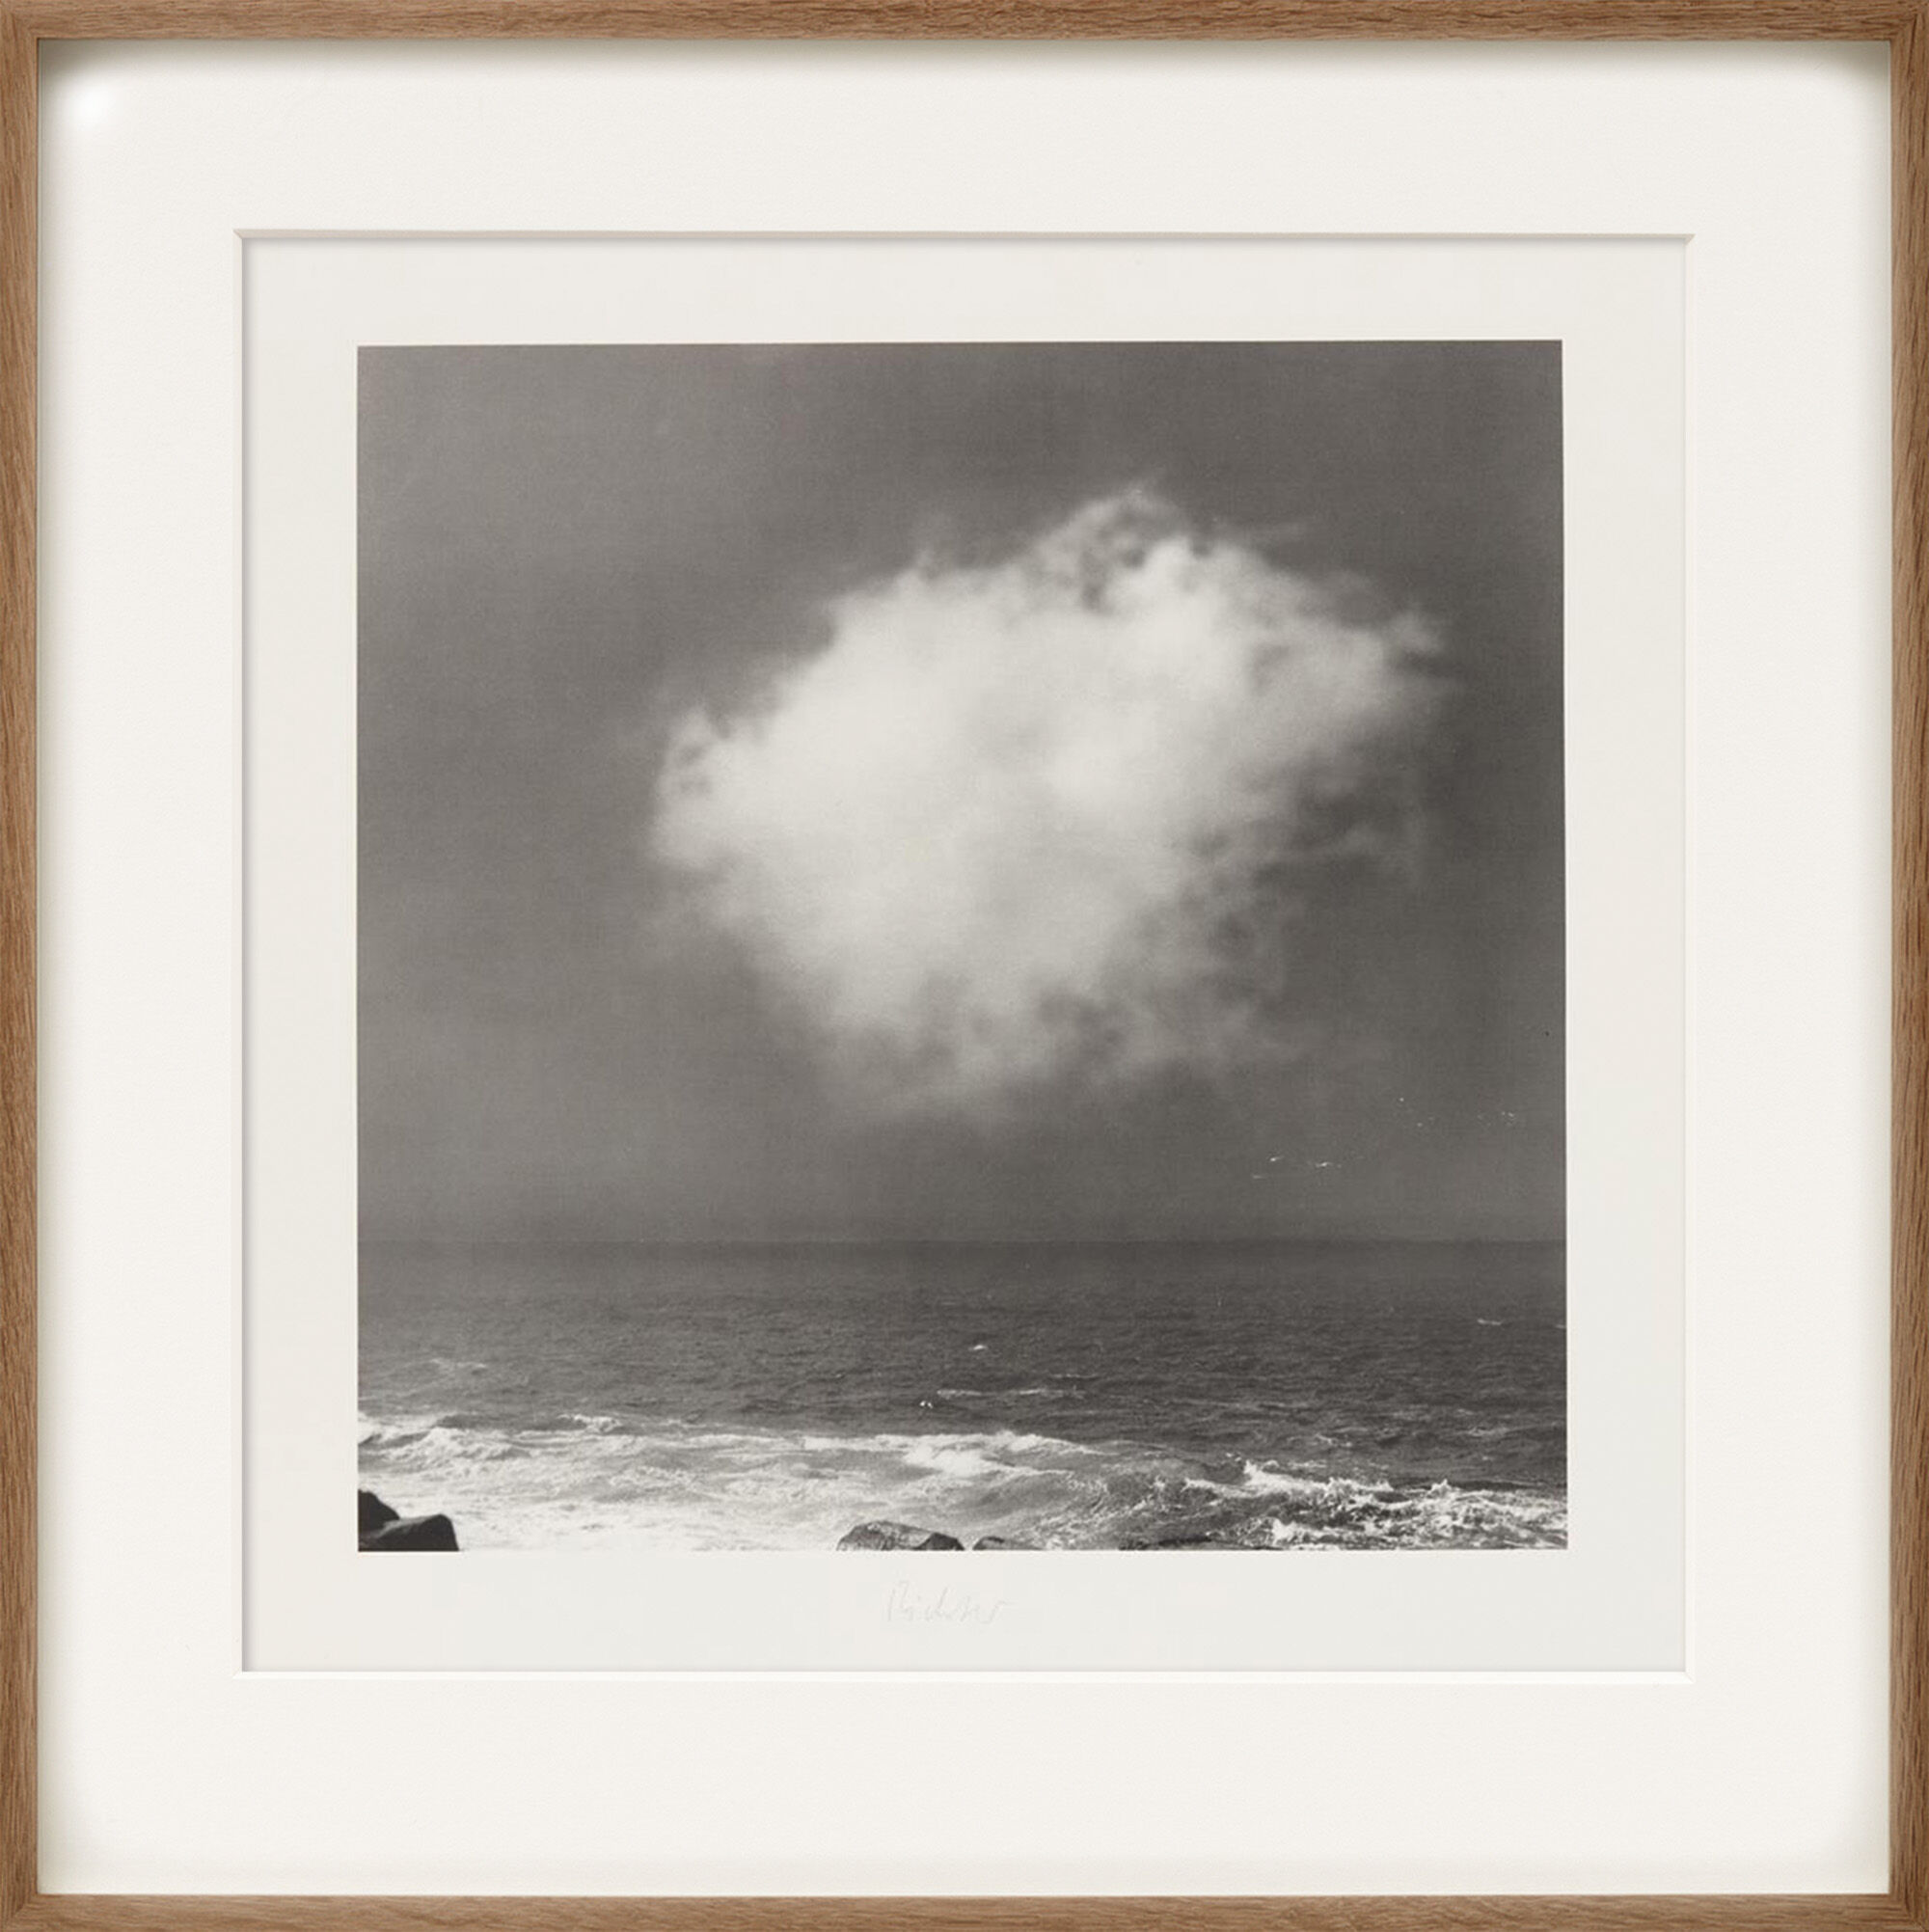 Picture "Cloud" (1971) by Gerhard Richter